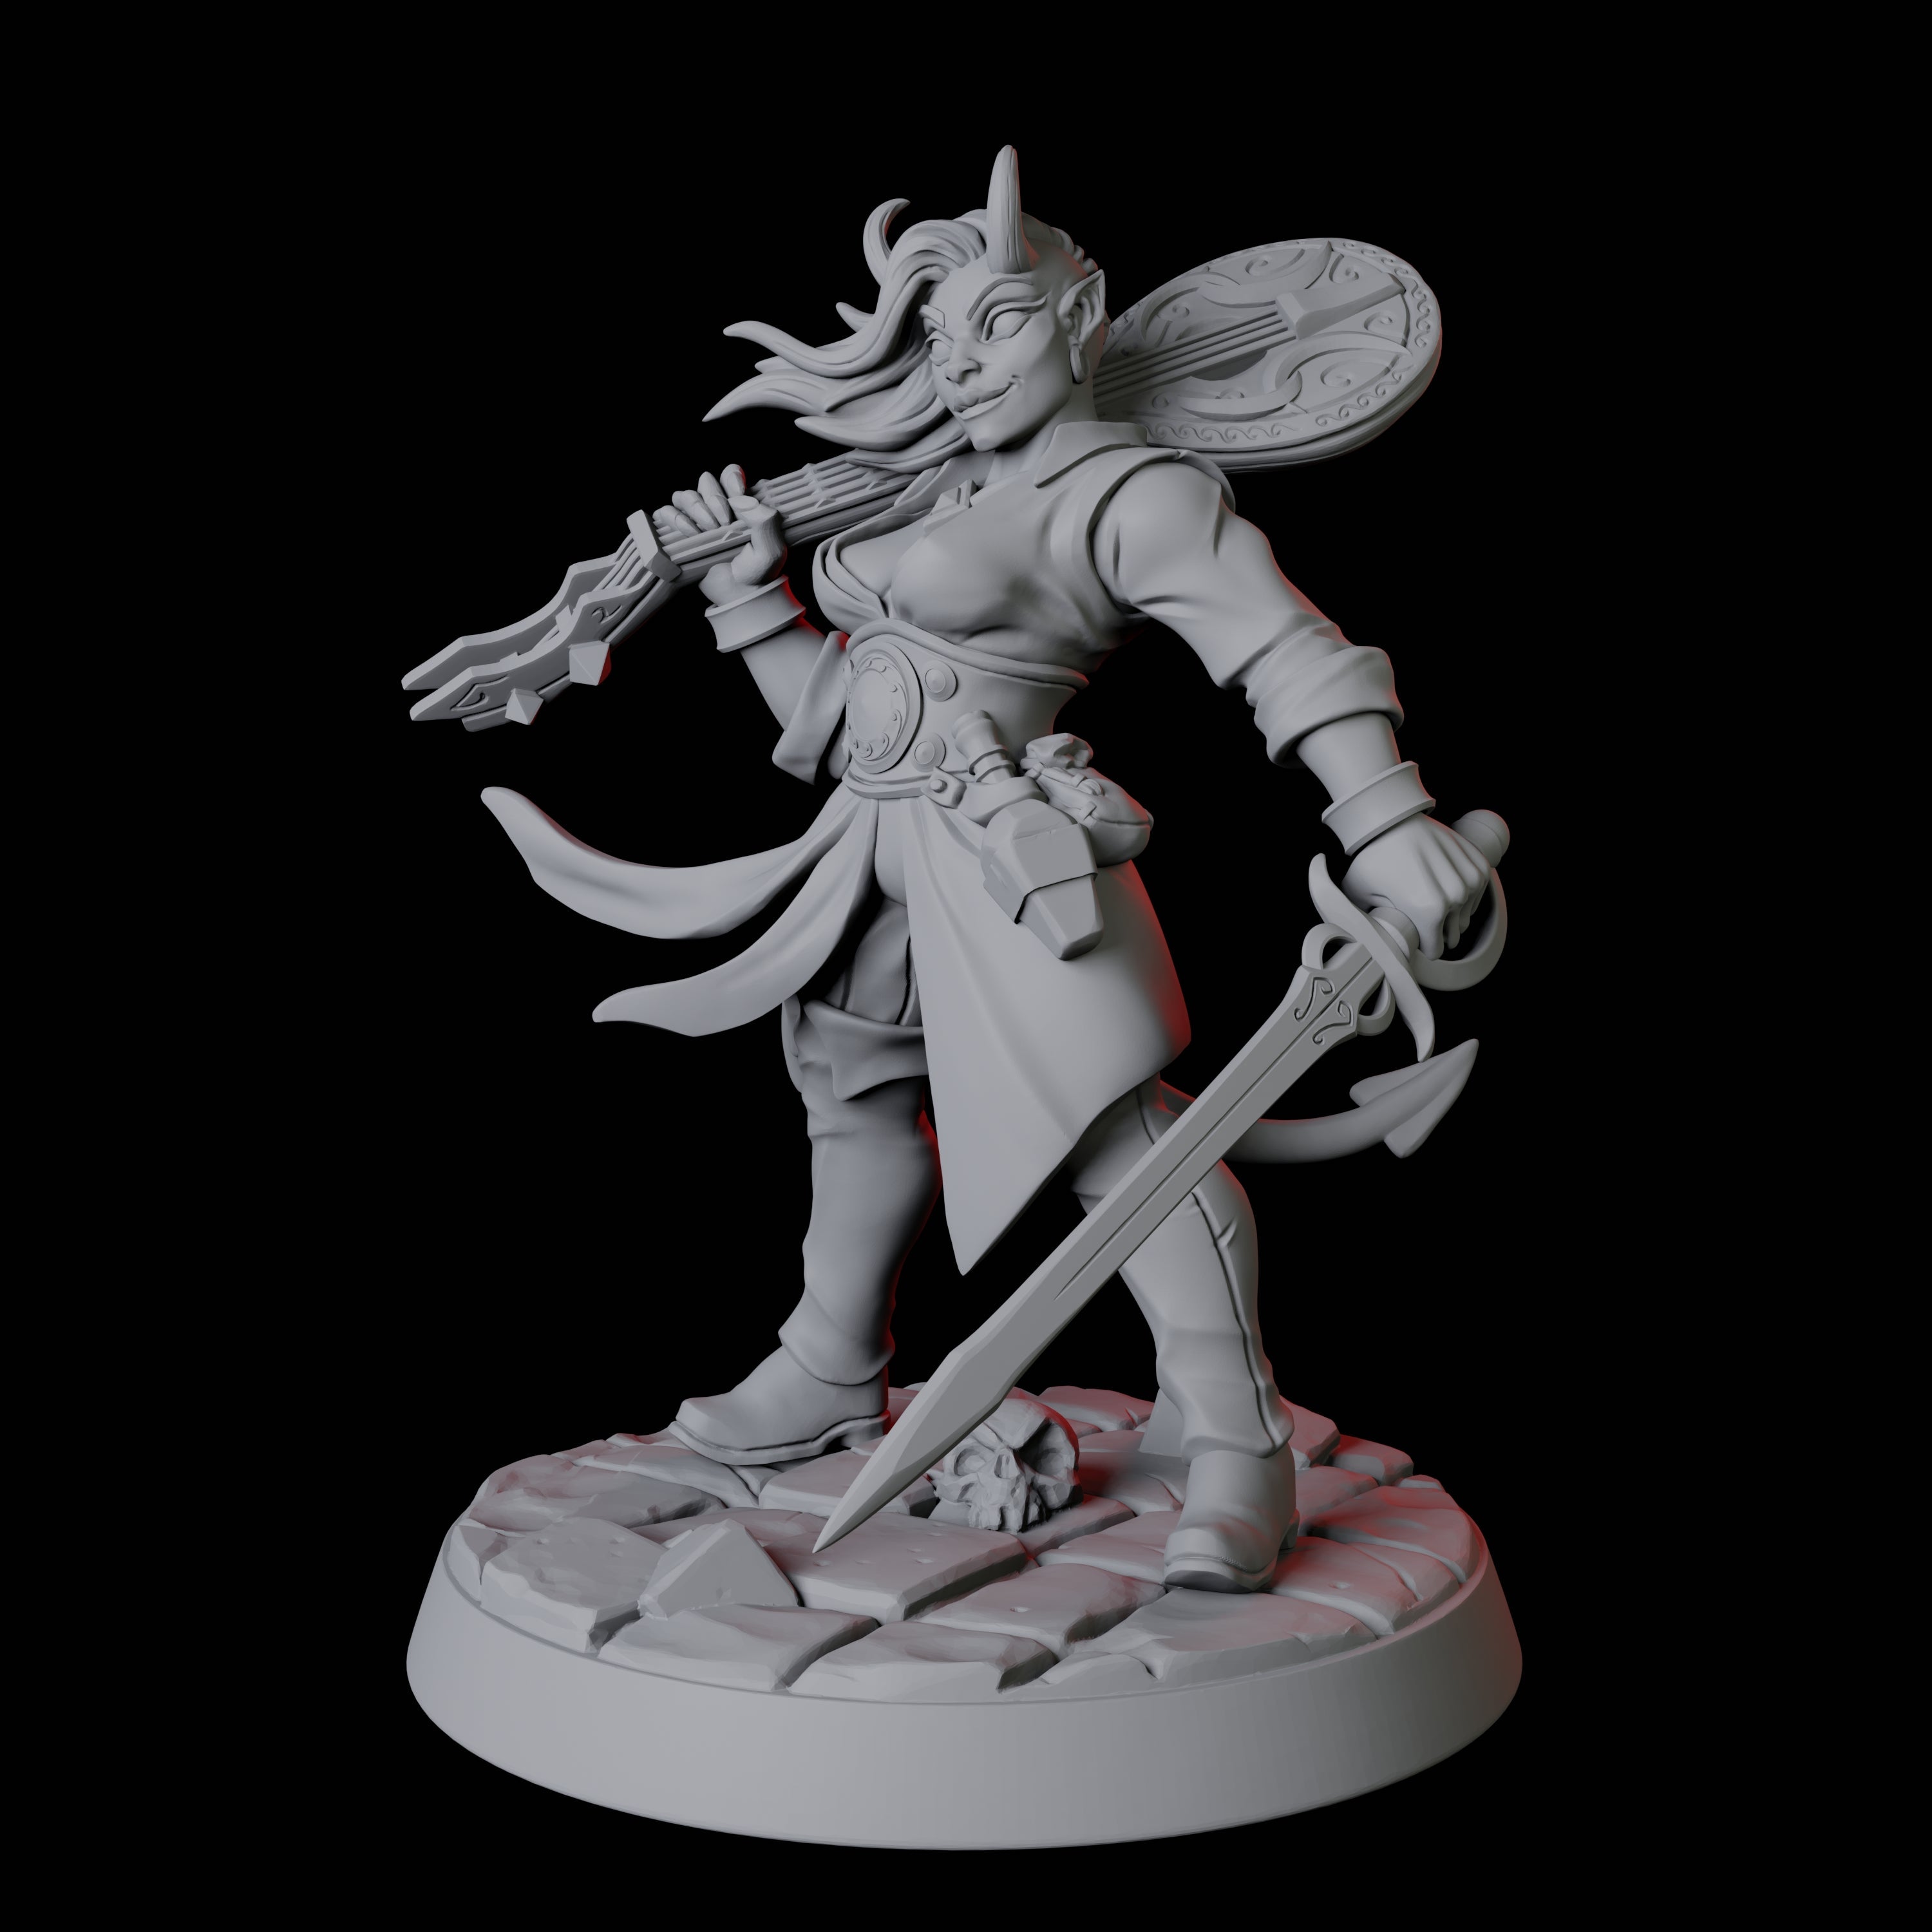 Tiefling Bard E Miniature for Dungeons and Dragons, Pathfinder or other TTRPGs